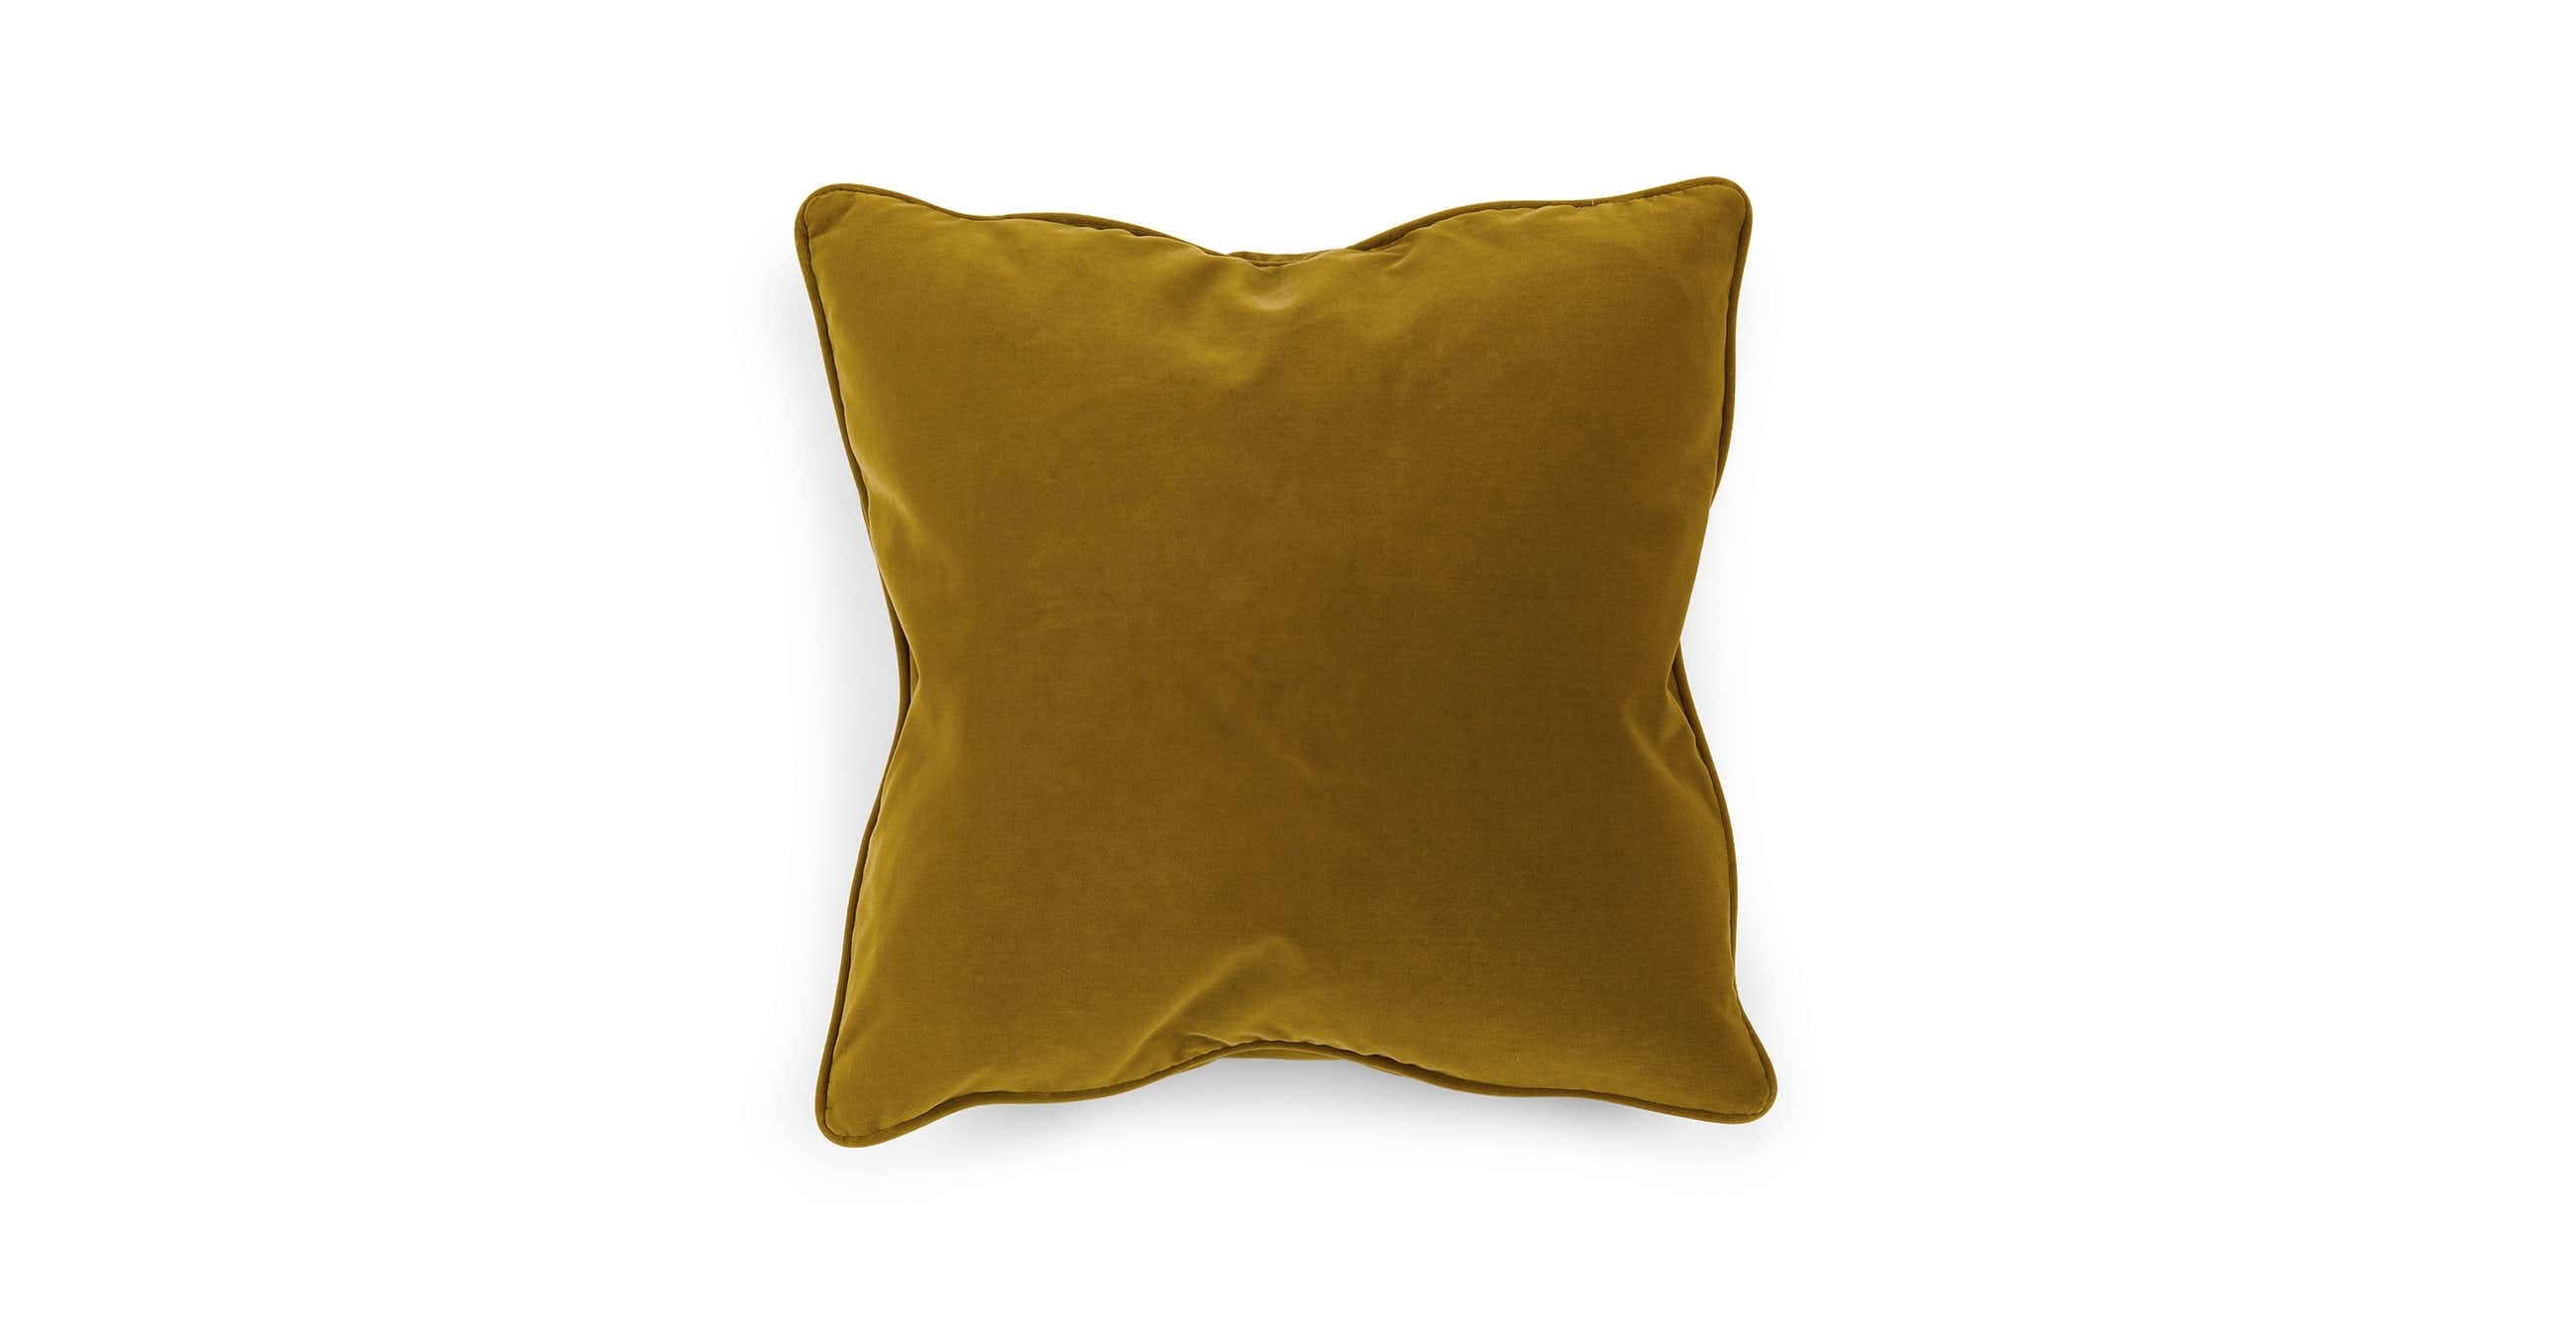 Lucca Yarrow Gold - Pillow Set of 2 - insert included - Image 4